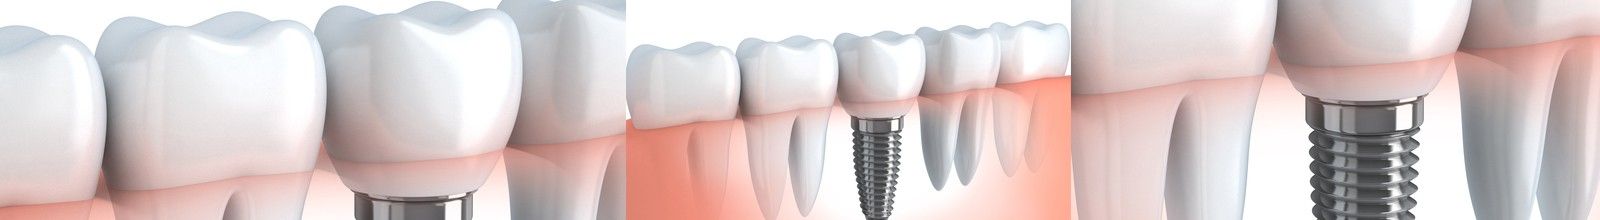 Keyhole Implant / 3D Guided Dental Implants